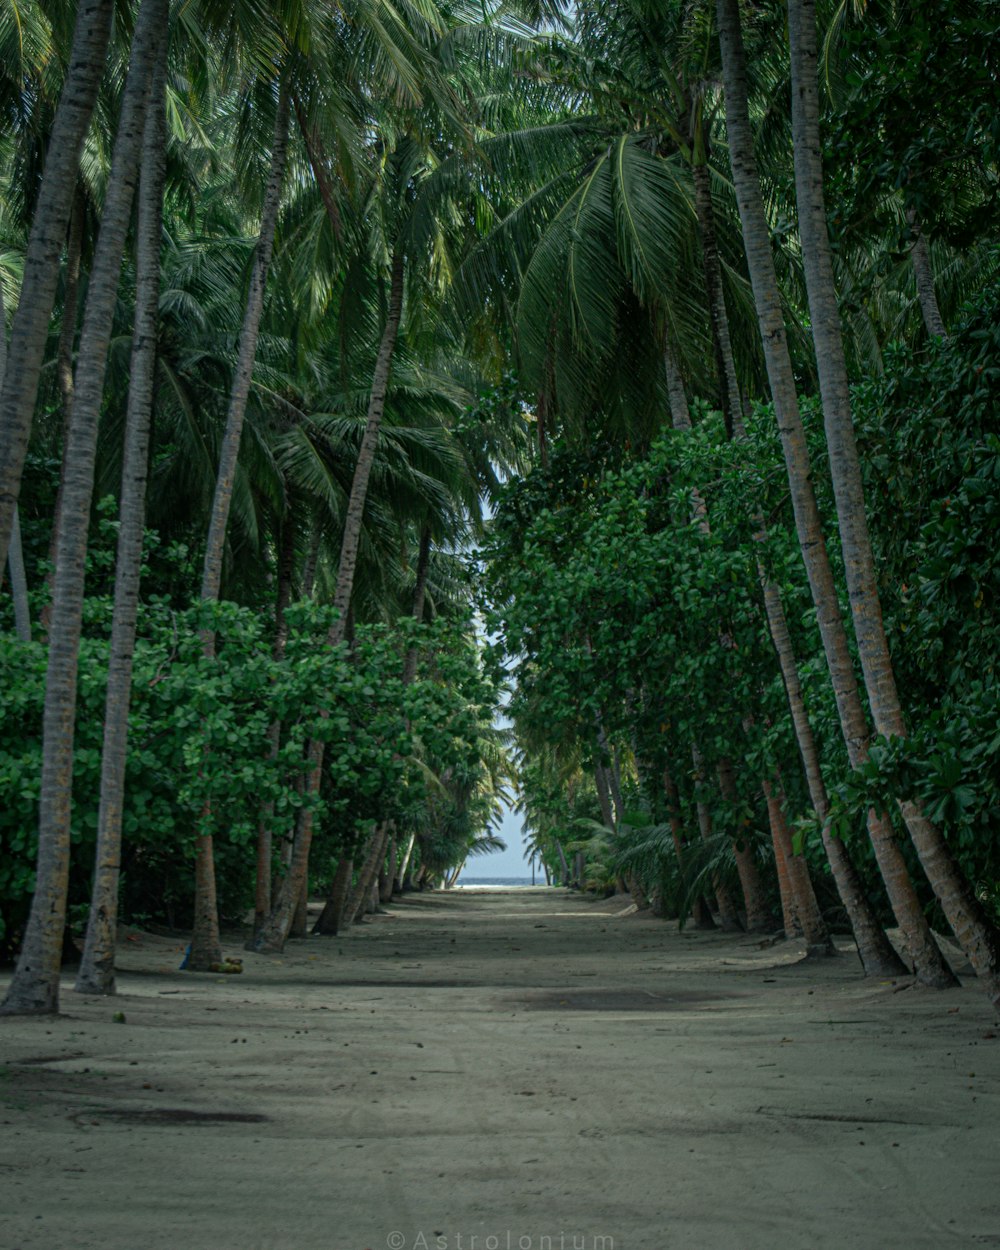 a dirt road surrounded by palm trees and water